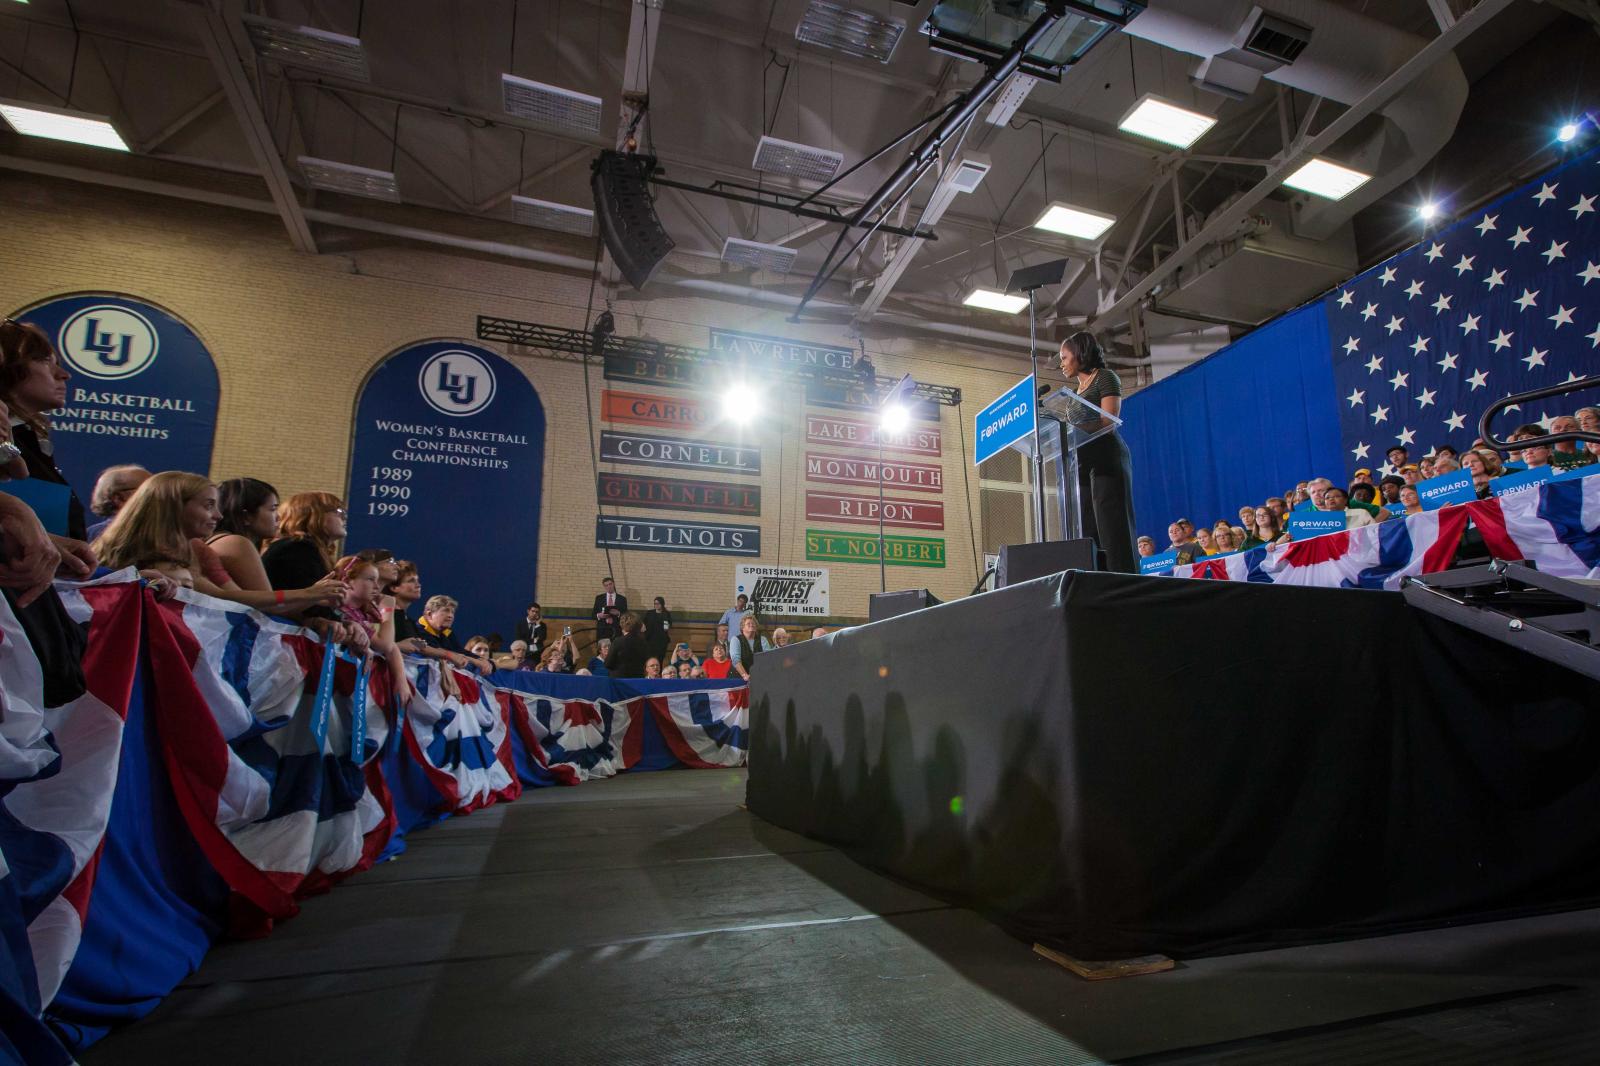 Michelle Obama speaks from a stage in Alexander Gym as a crowds leans forward.